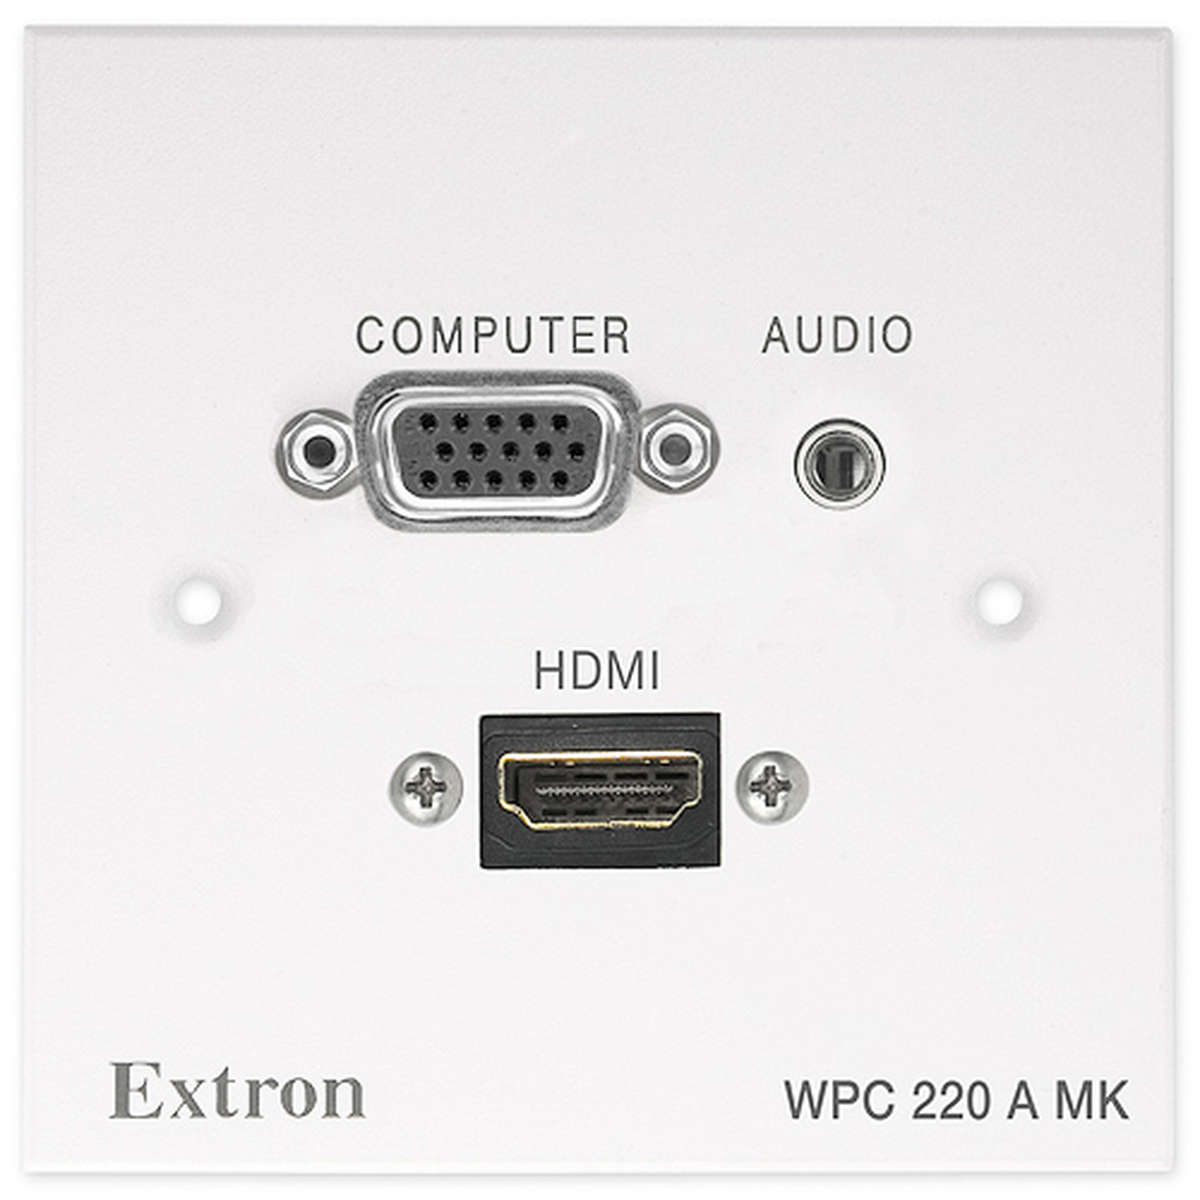 Extron WPC 220 A MK 70-1032-03  product image